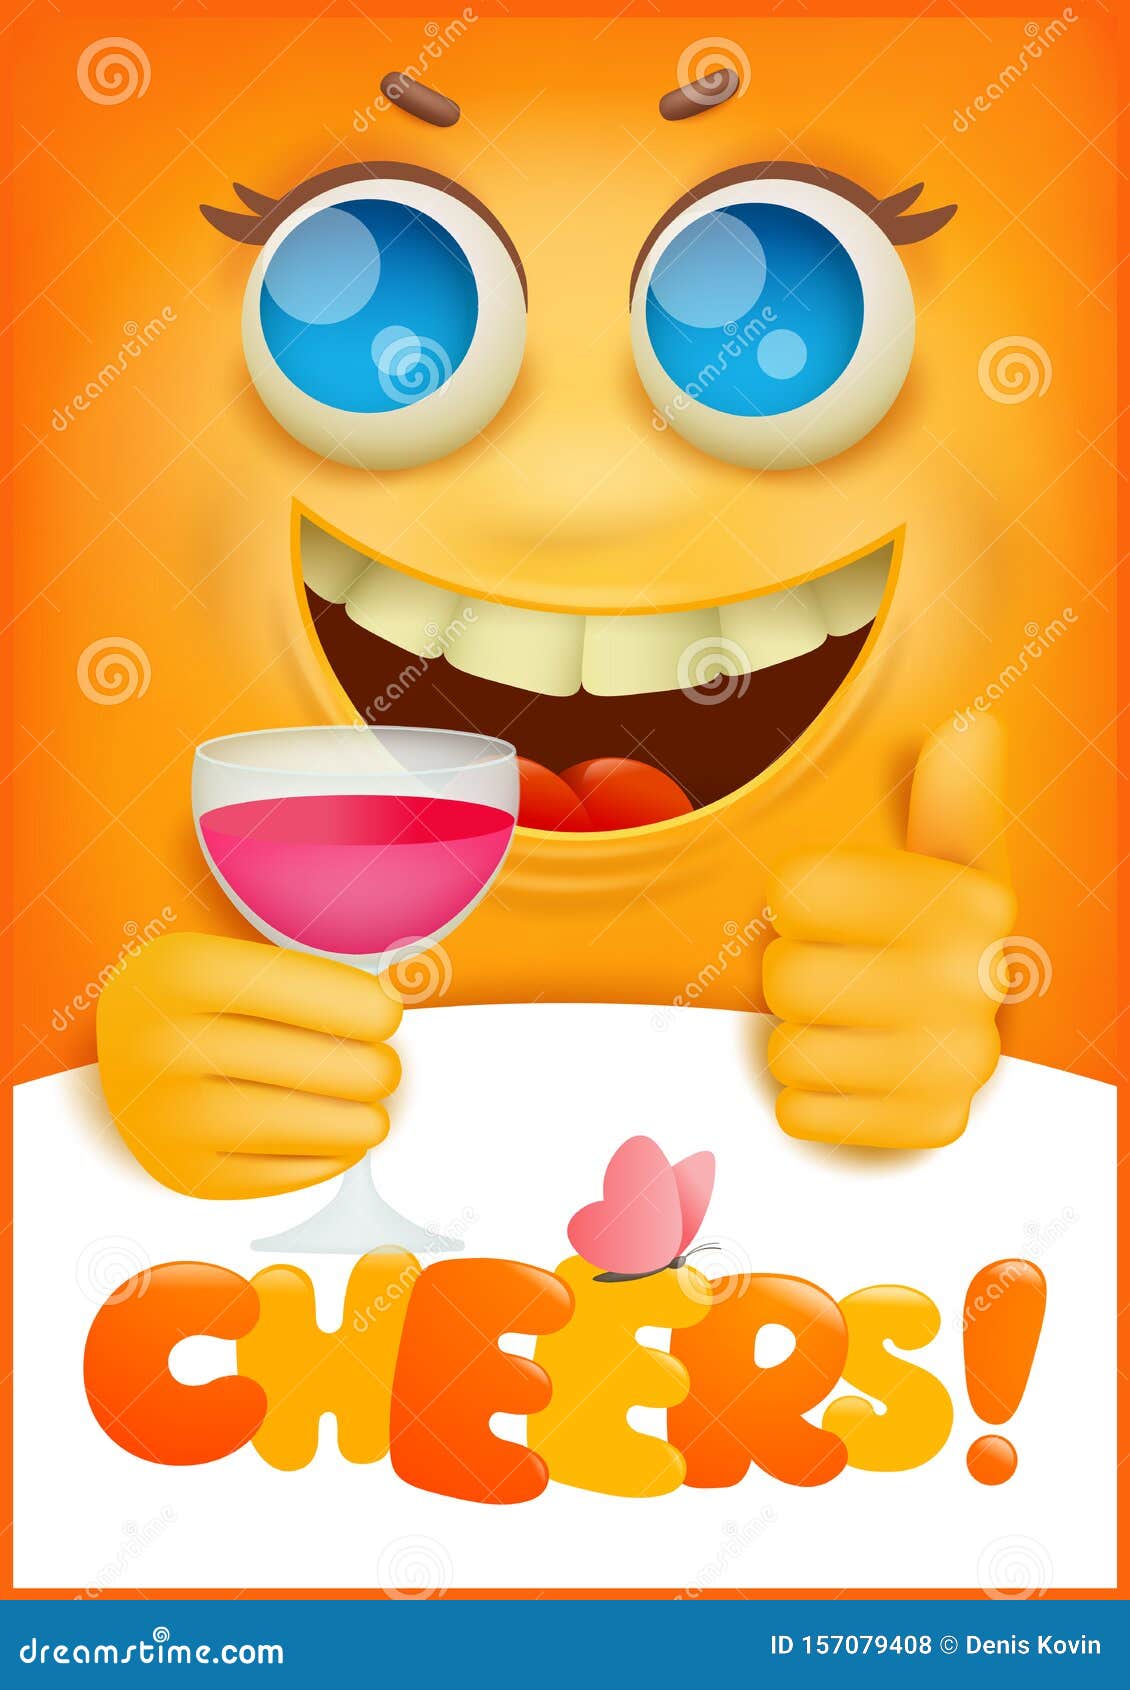 Cheers Emoticon Card With Yellow Emoji Cartoon Character Holding Glass ...